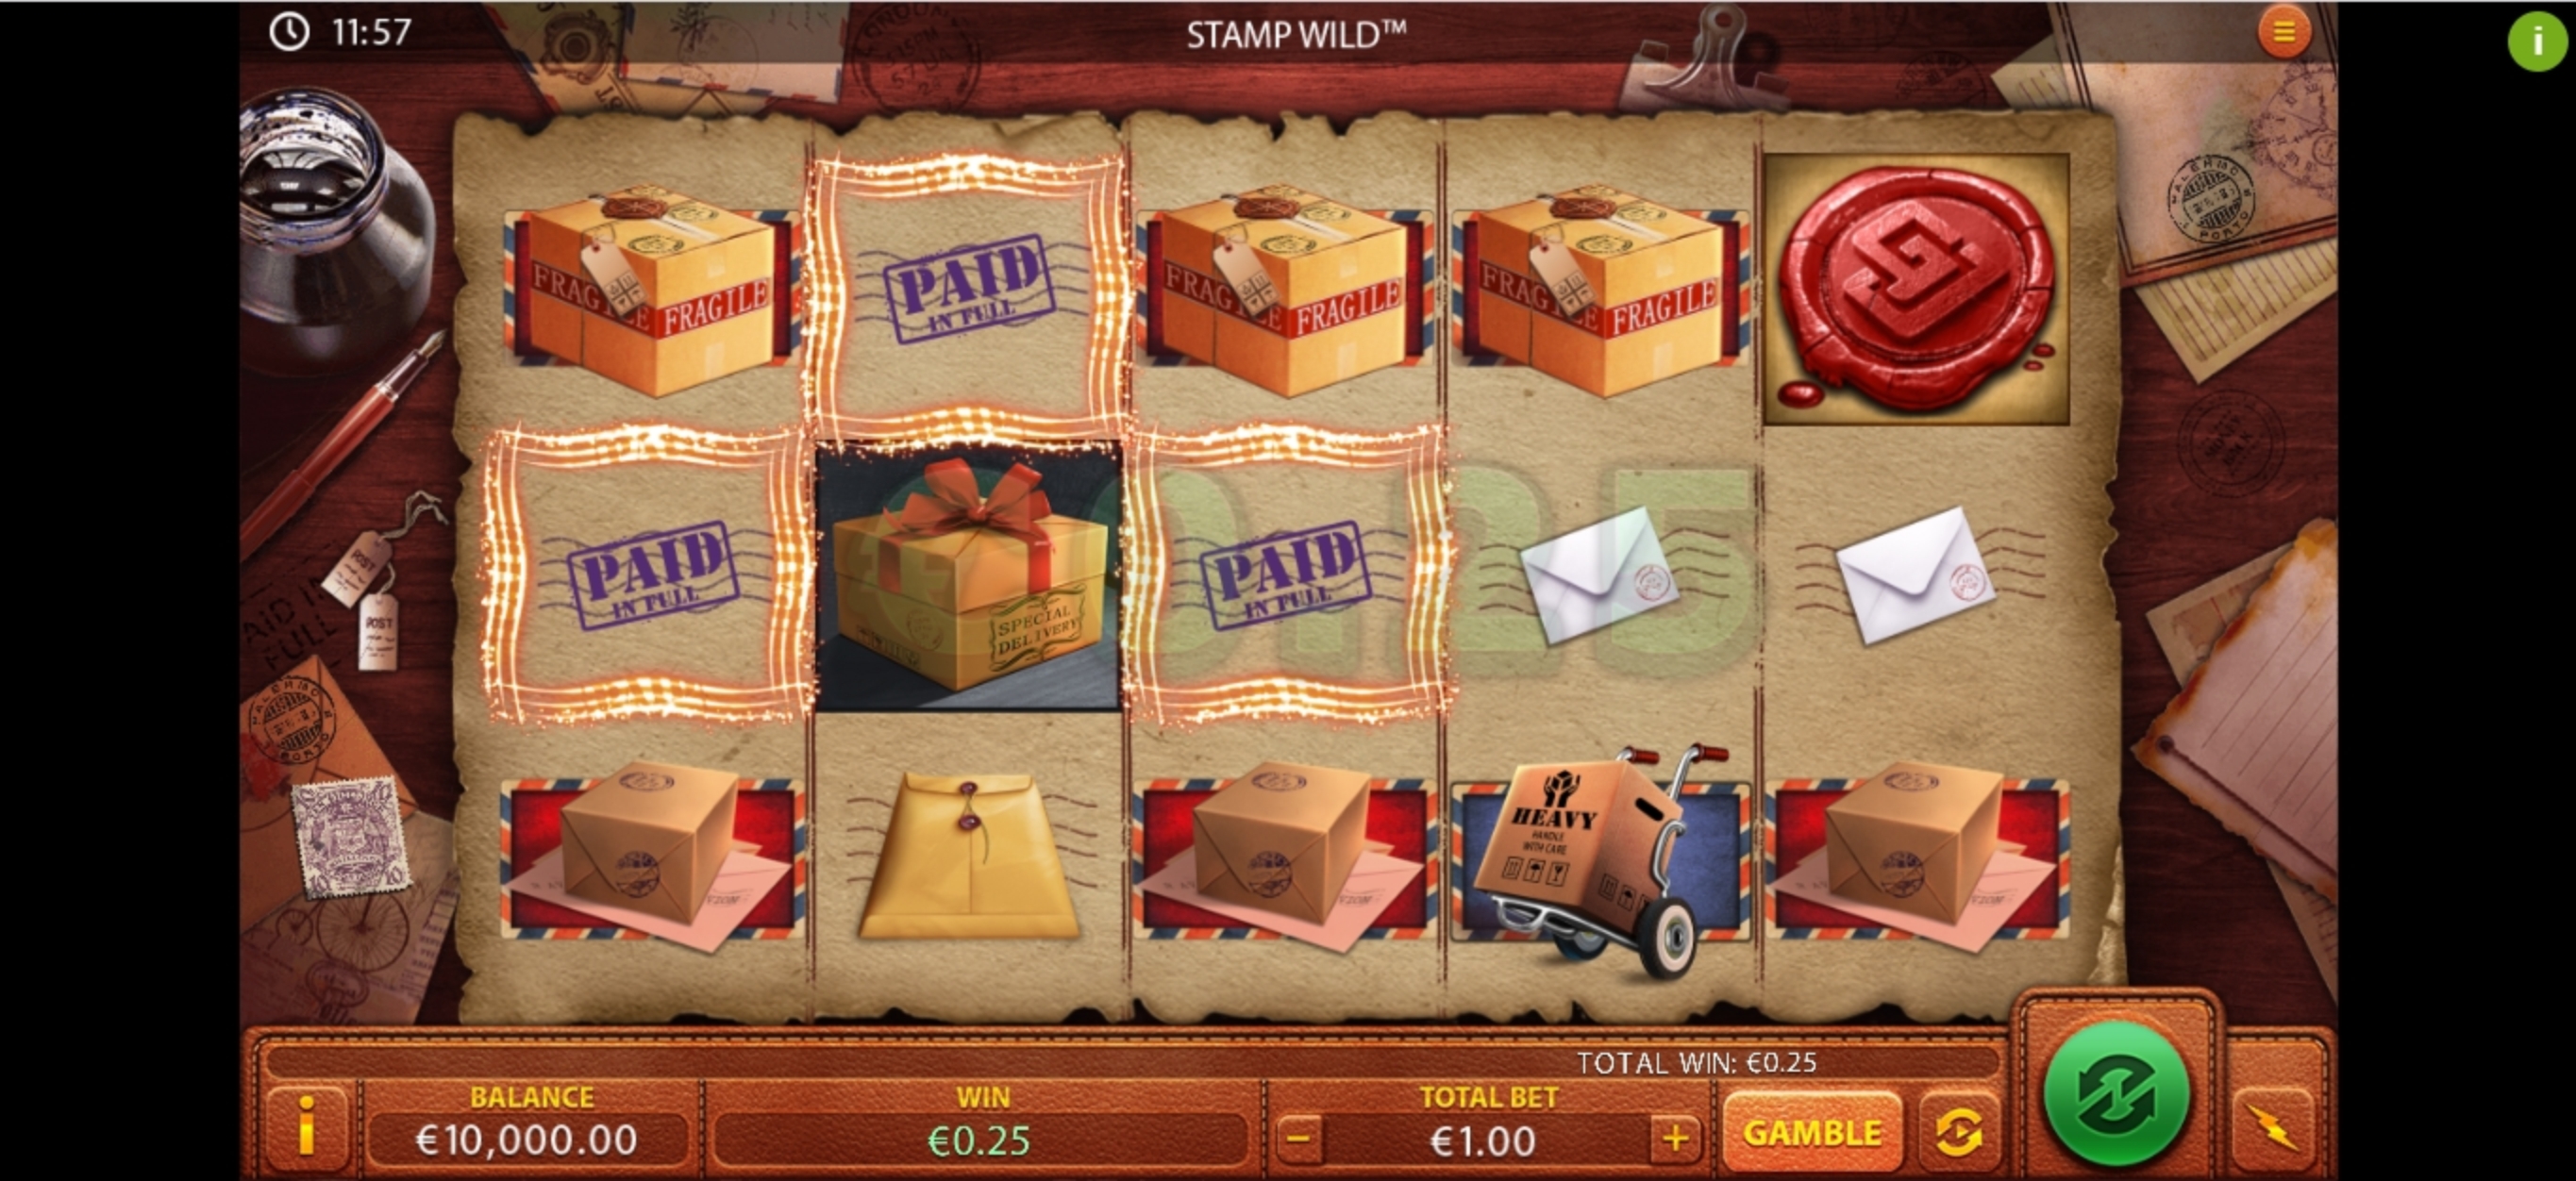 Win Money in Stamp Wild Free Slot Game by Green Jade Games